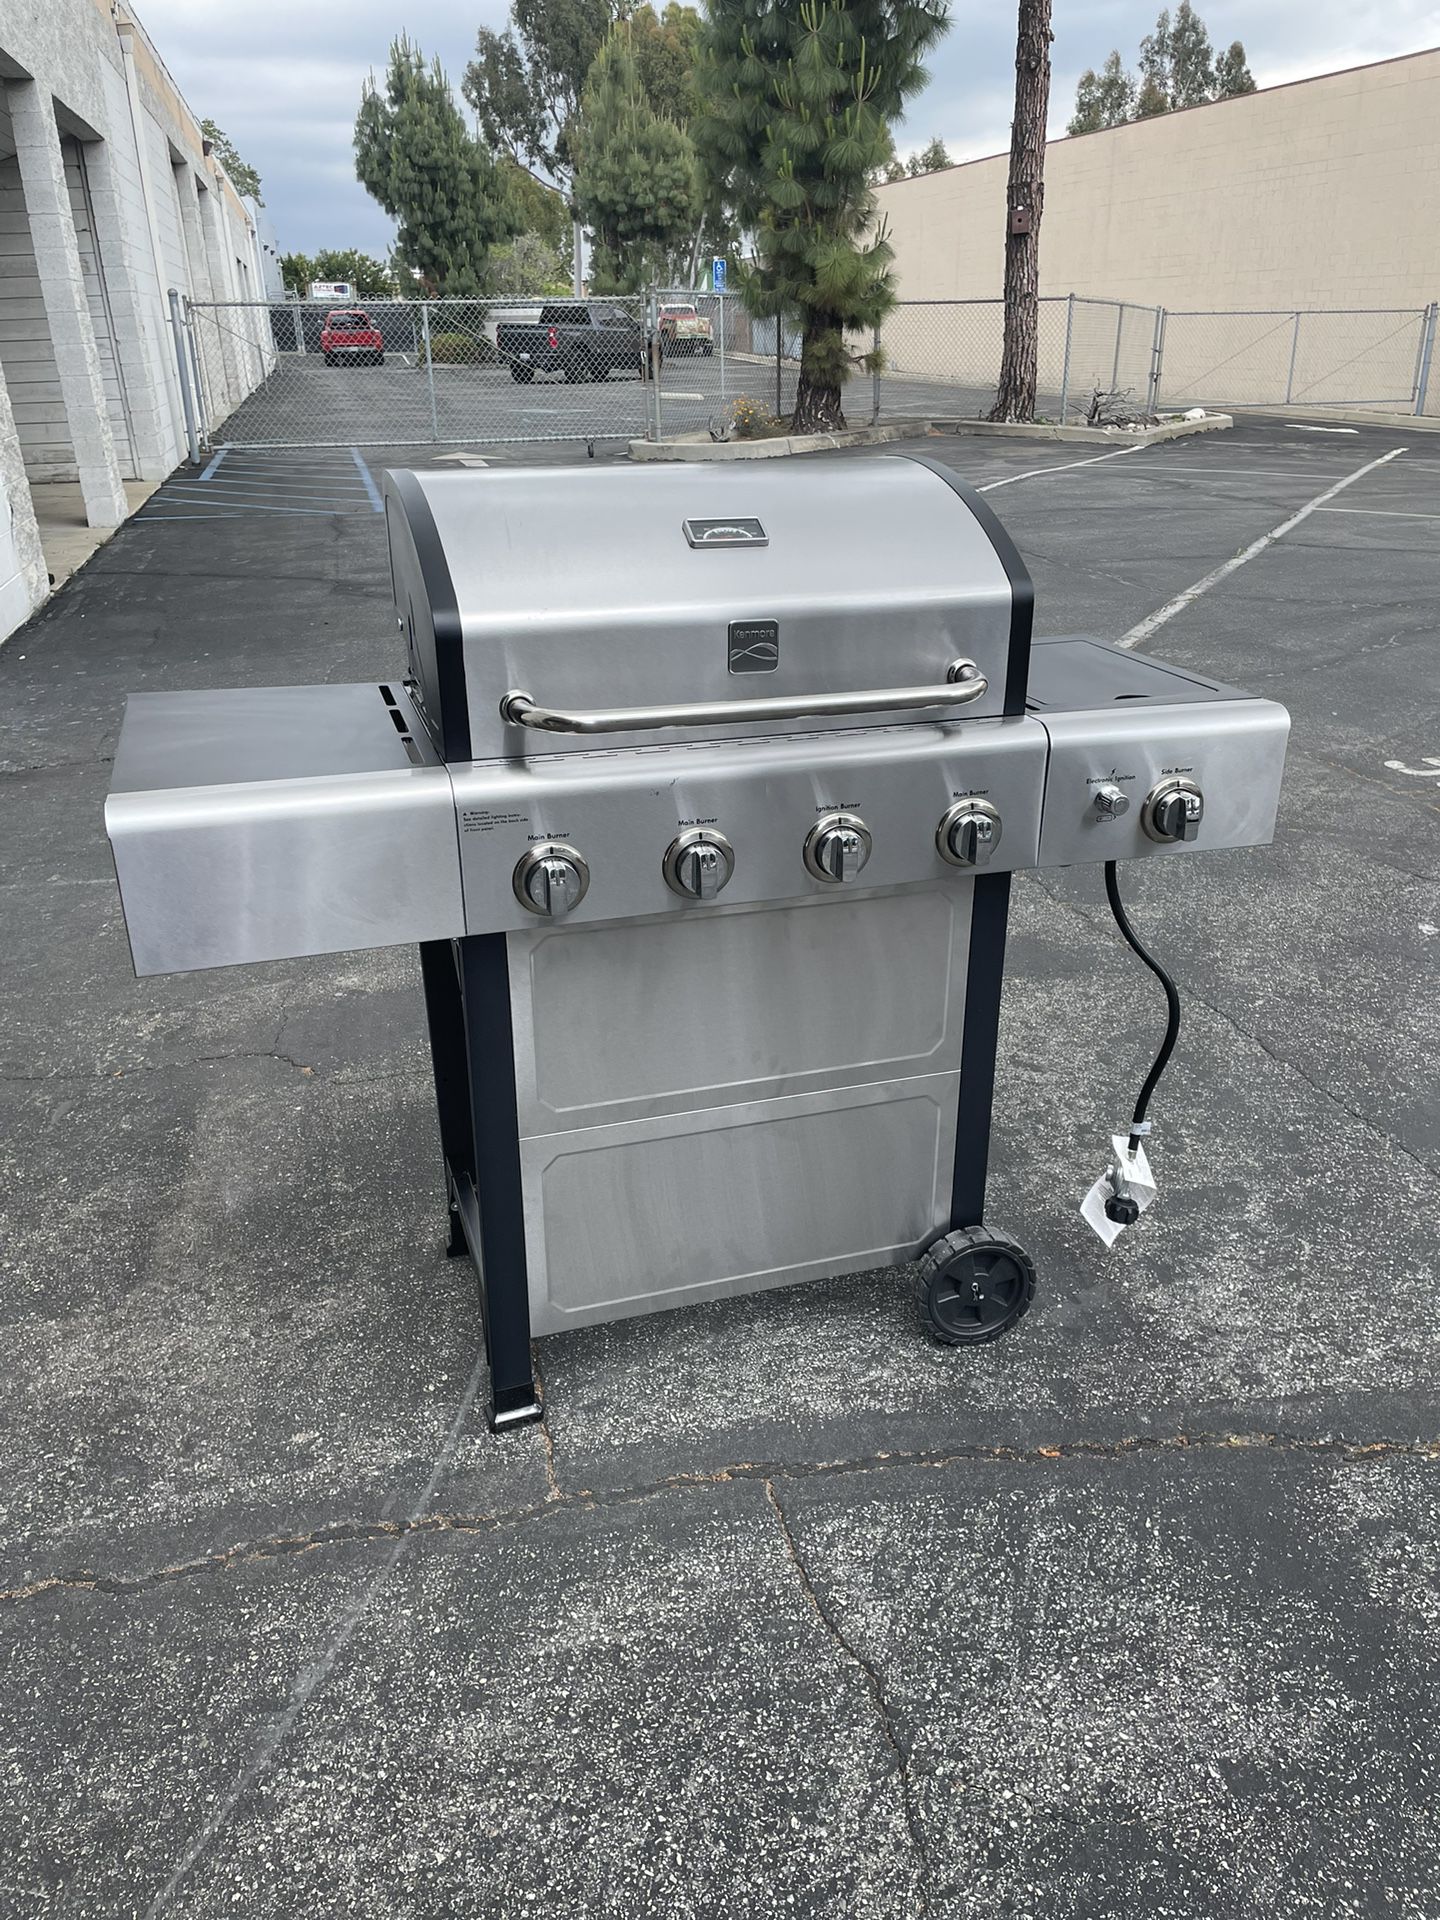 Bbq Grill Kenmore Stainless Steel 